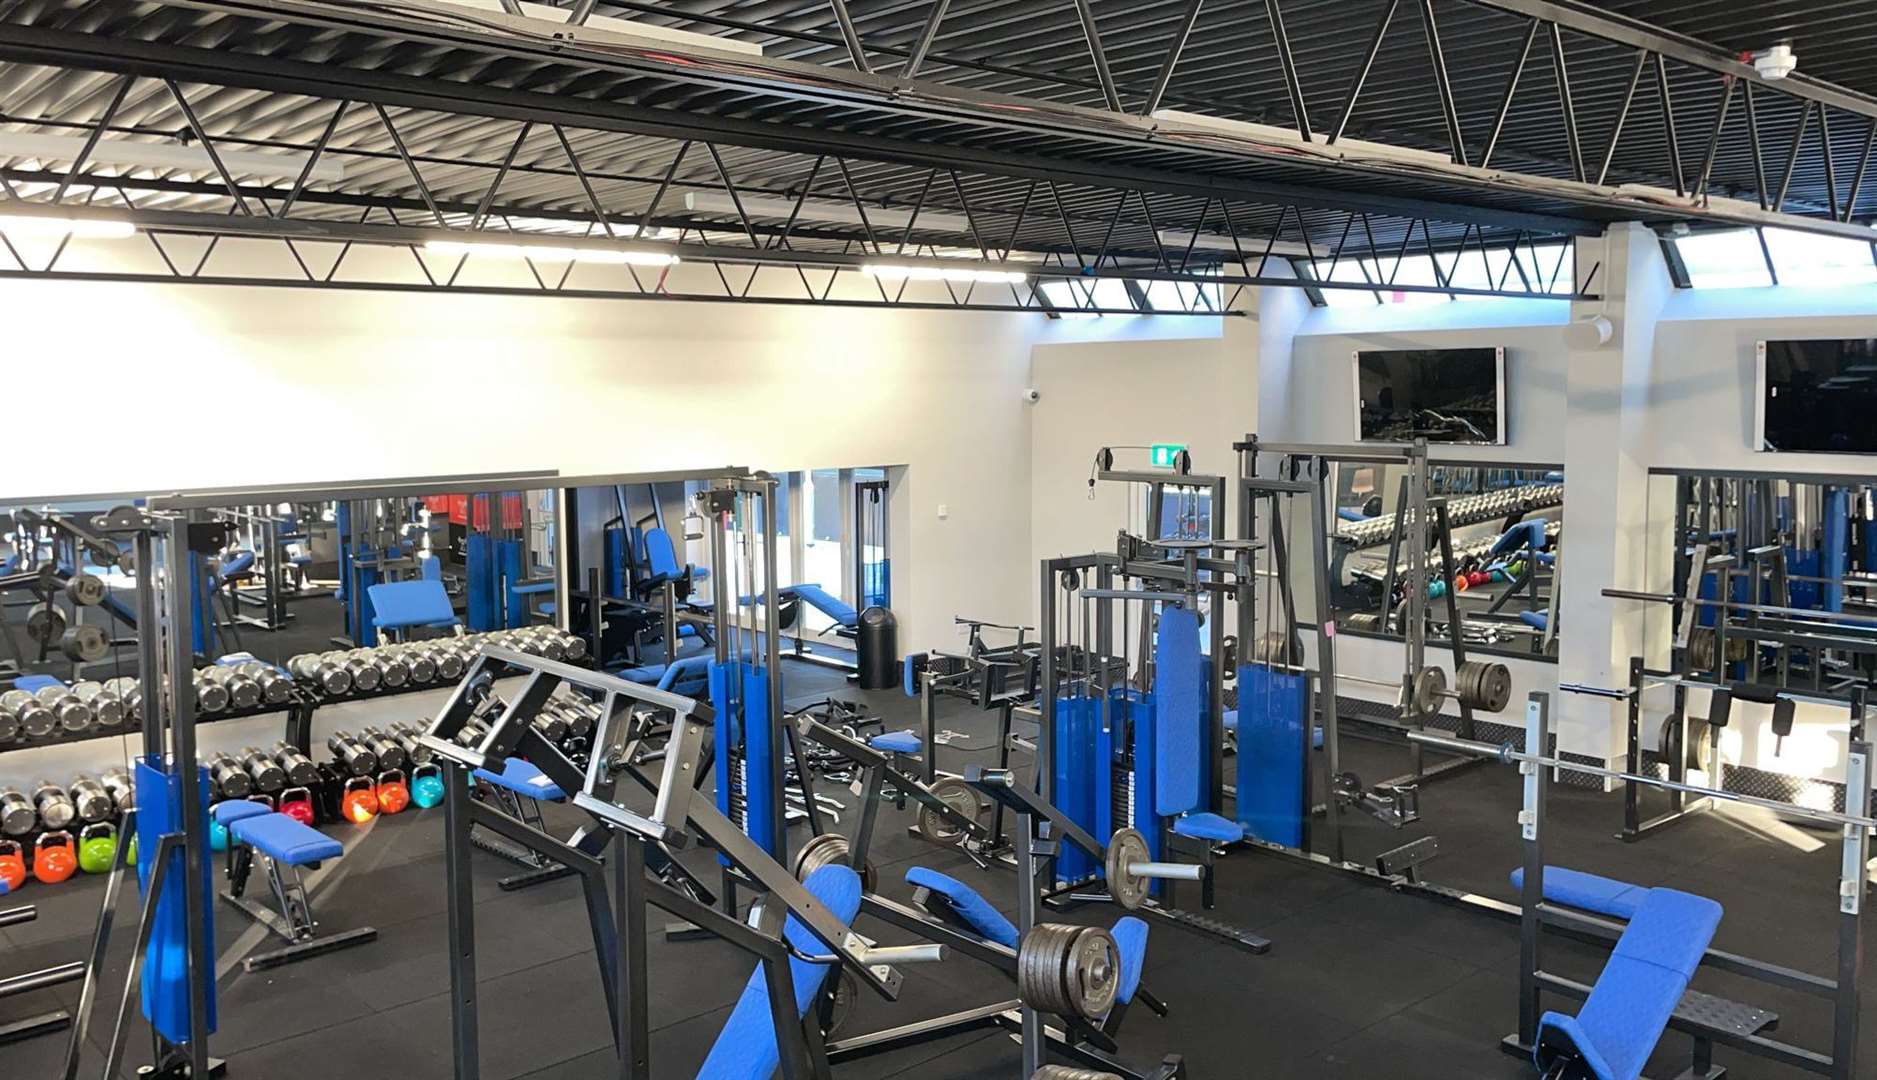 Main Gym Area at the newly refurbished Europa Weightlifting Gym in Temple Hill, Dartford. Photo credit: Andrew Callard